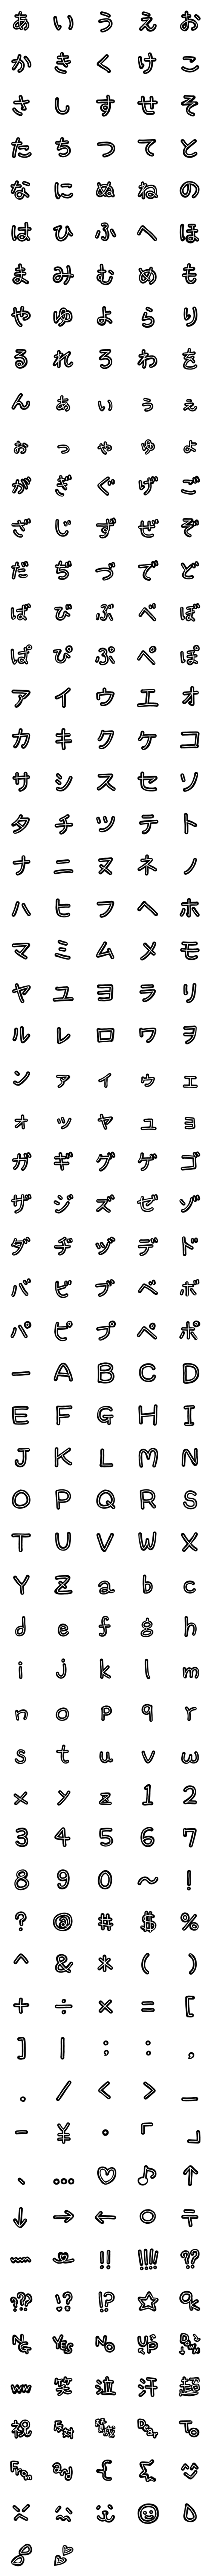 [LINE絵文字]シンプル！白黒文字と絵文字の画像一覧